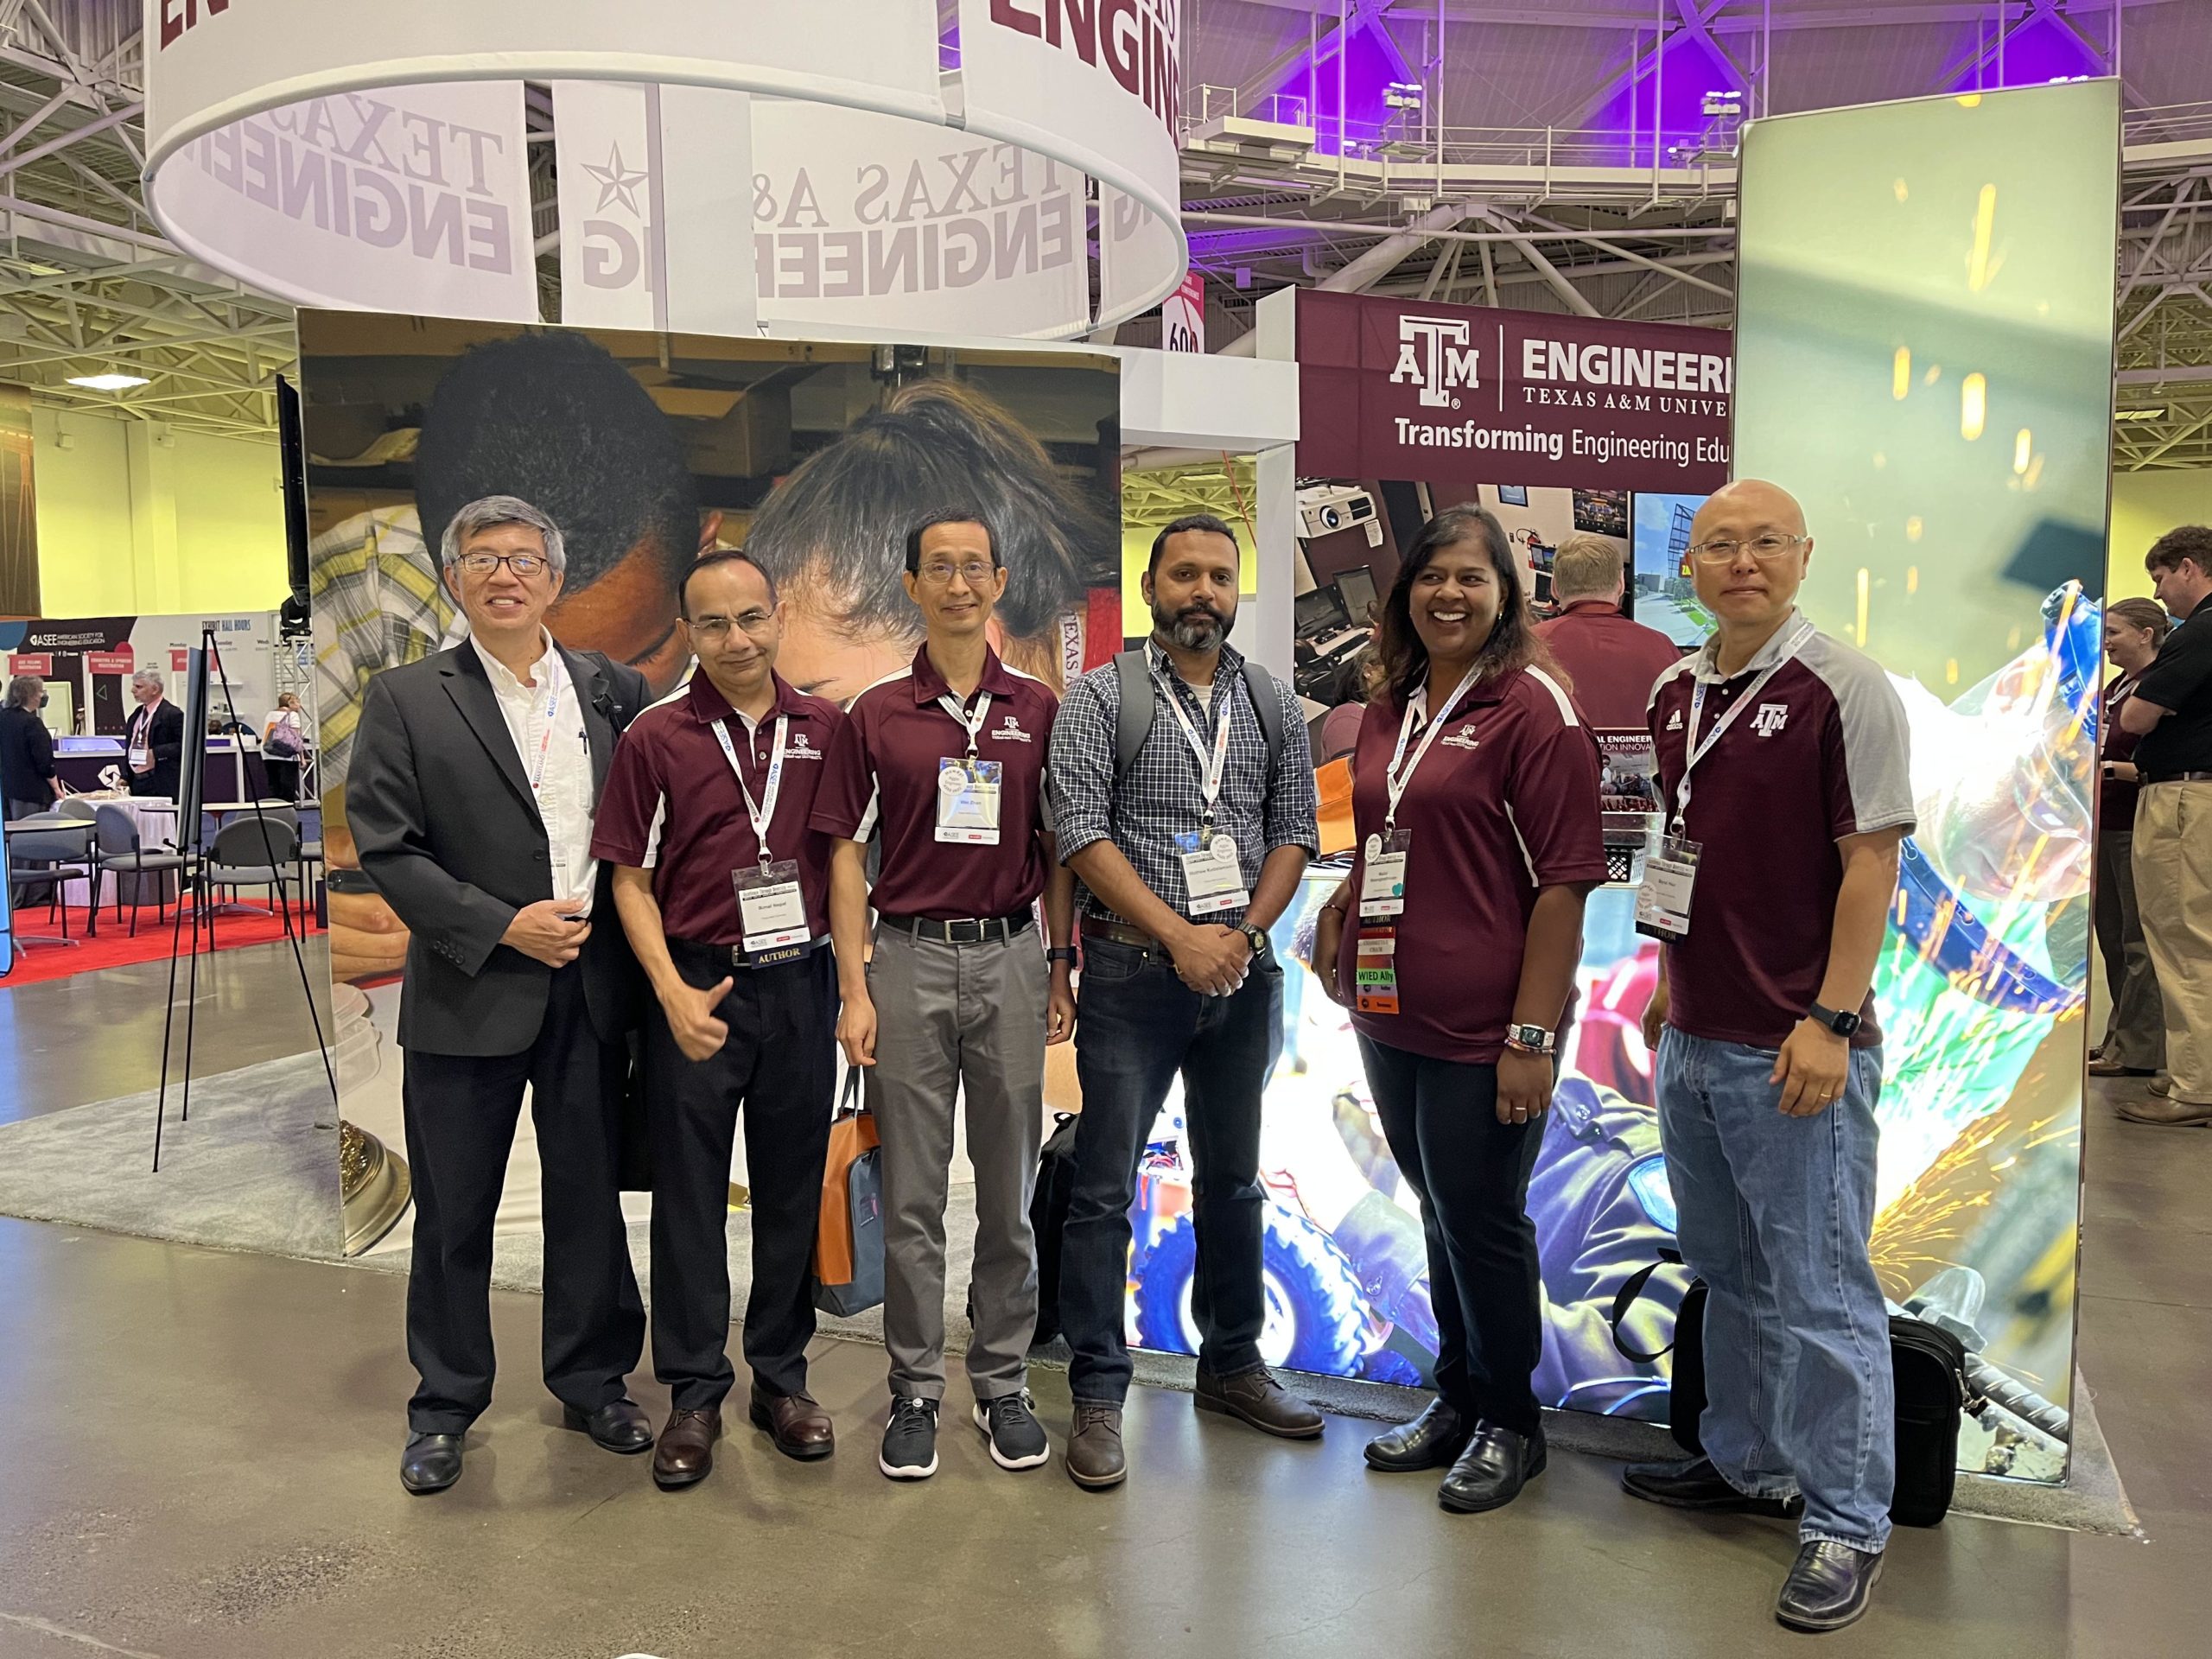 Texas A&M University at the ASEE Annual Conference and Exposition 2022